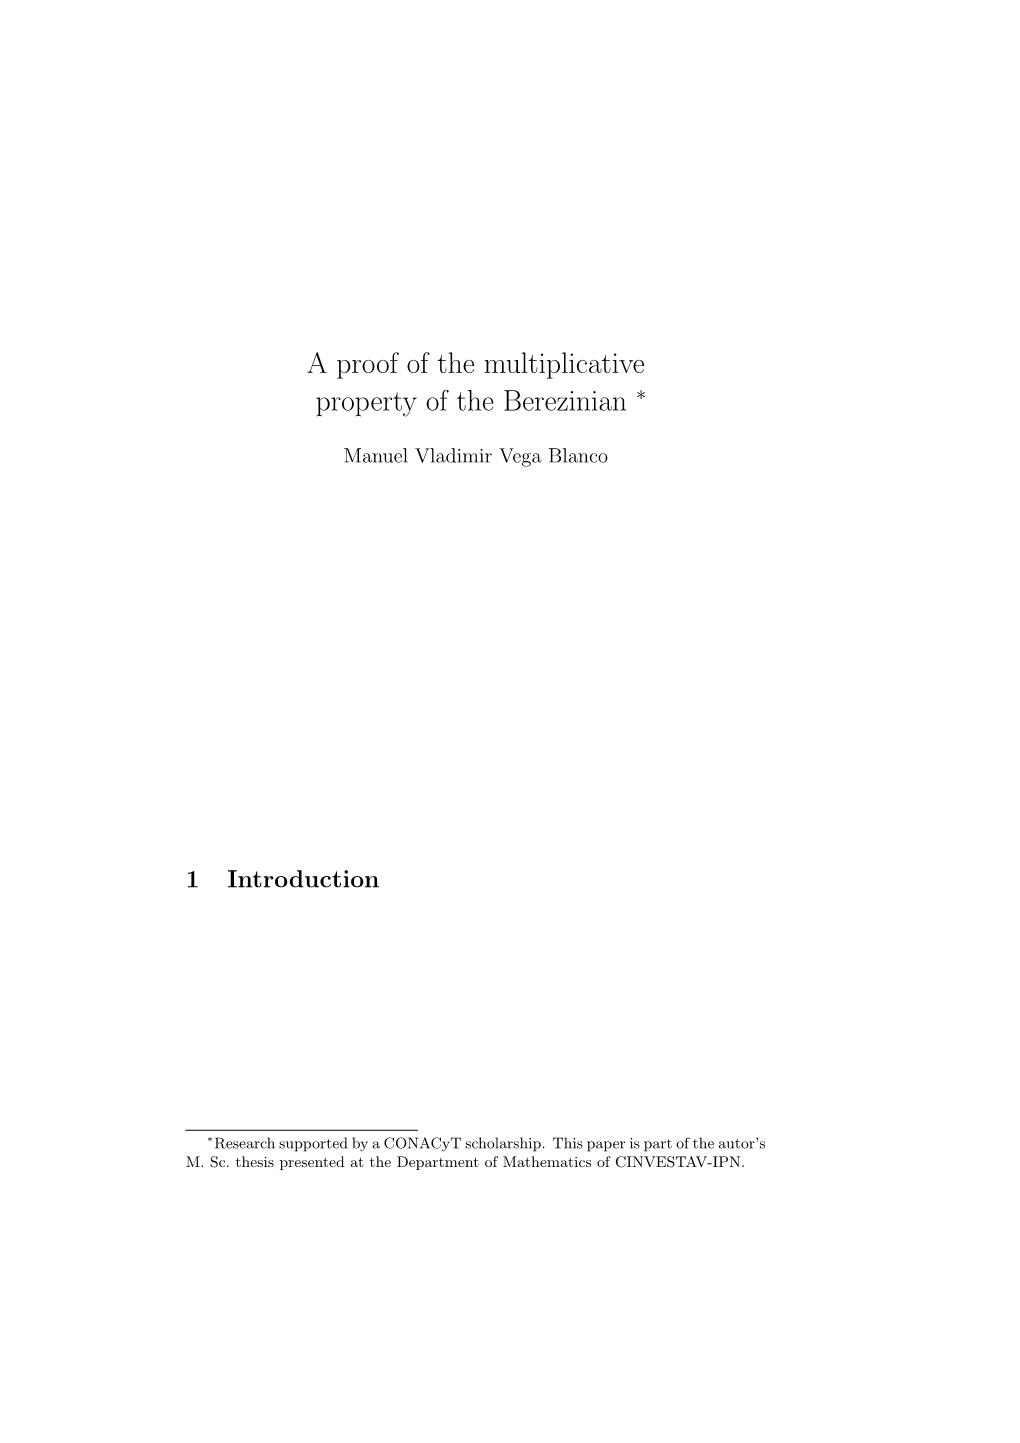 A Proof of the Multiplicative Property of the Berezinian ∗